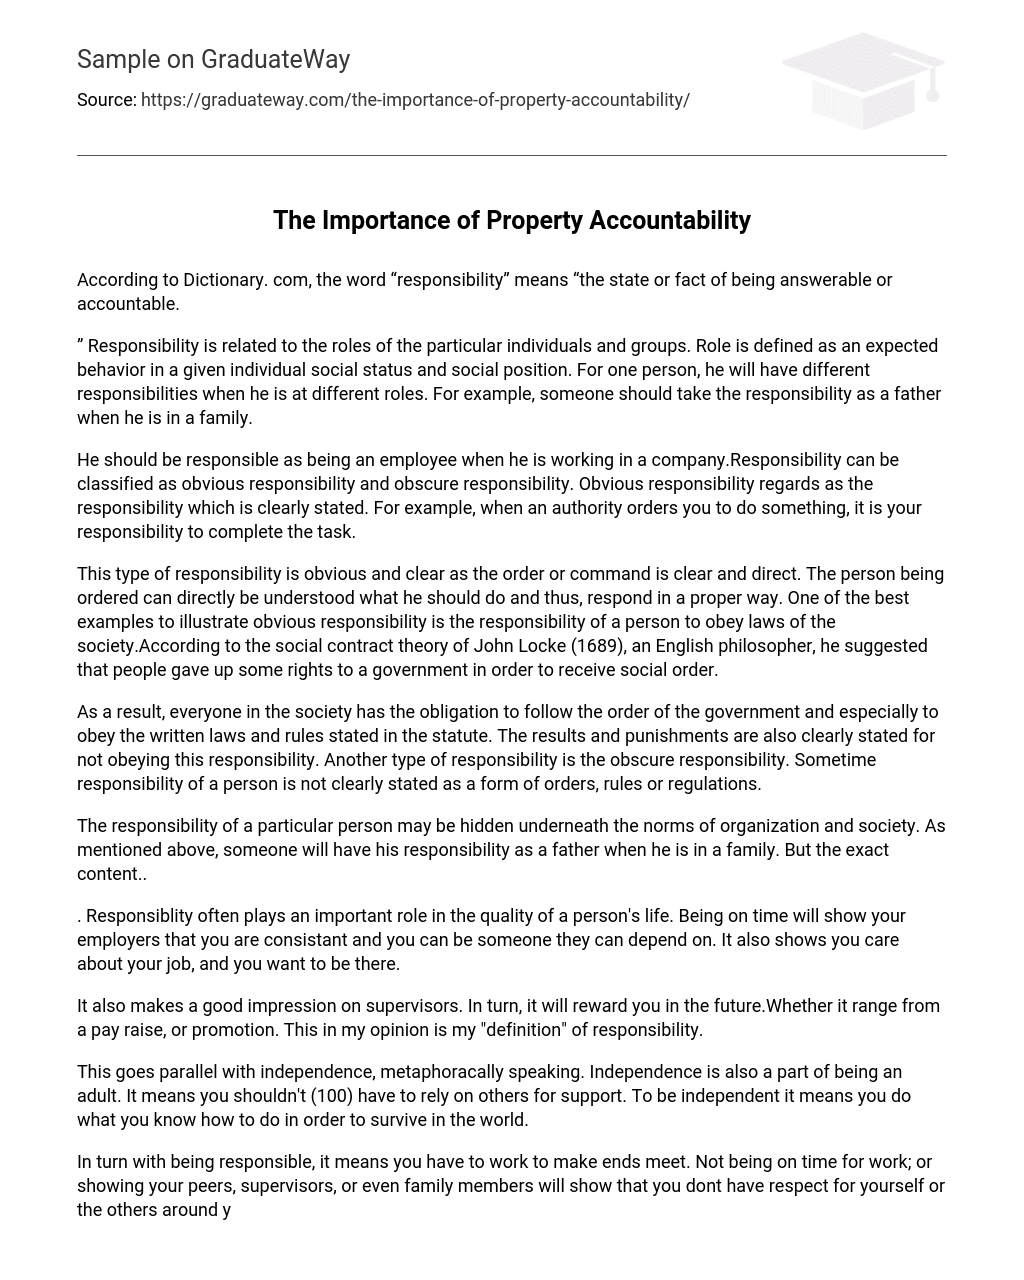 The Importance of Property Accountability